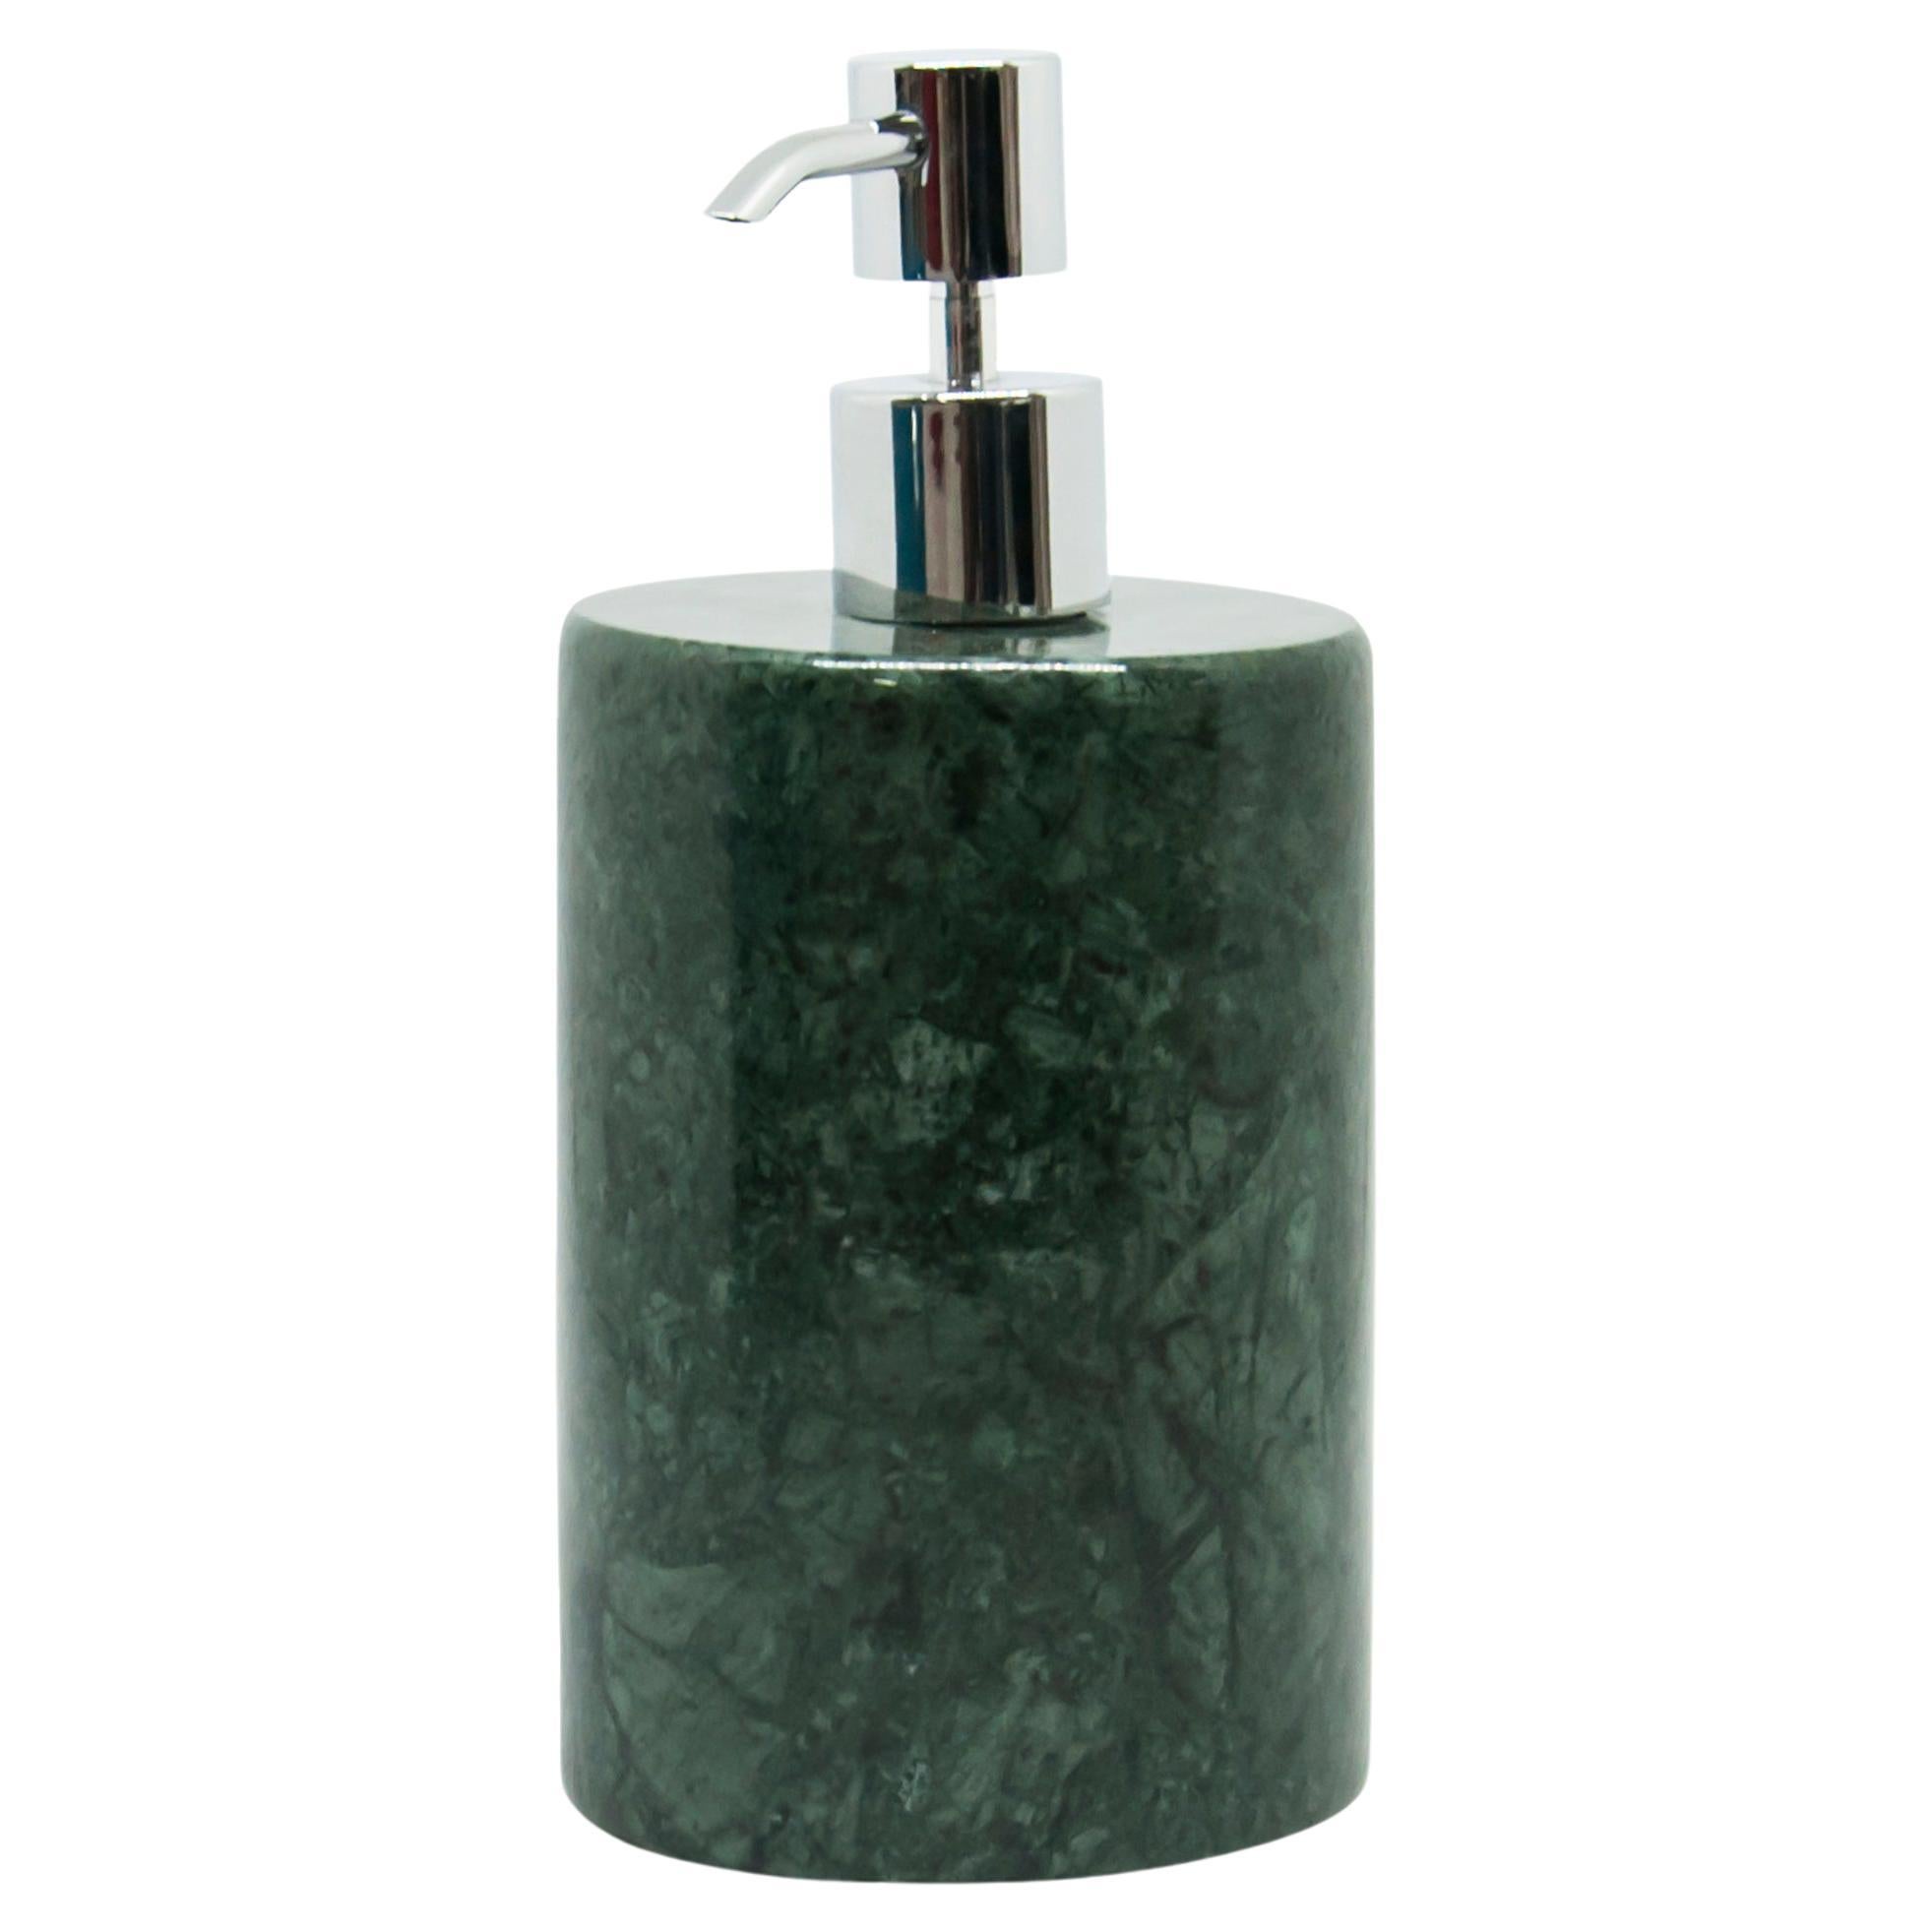 Handmade Rounded Soap Dispenser in Green Guatemala Marble